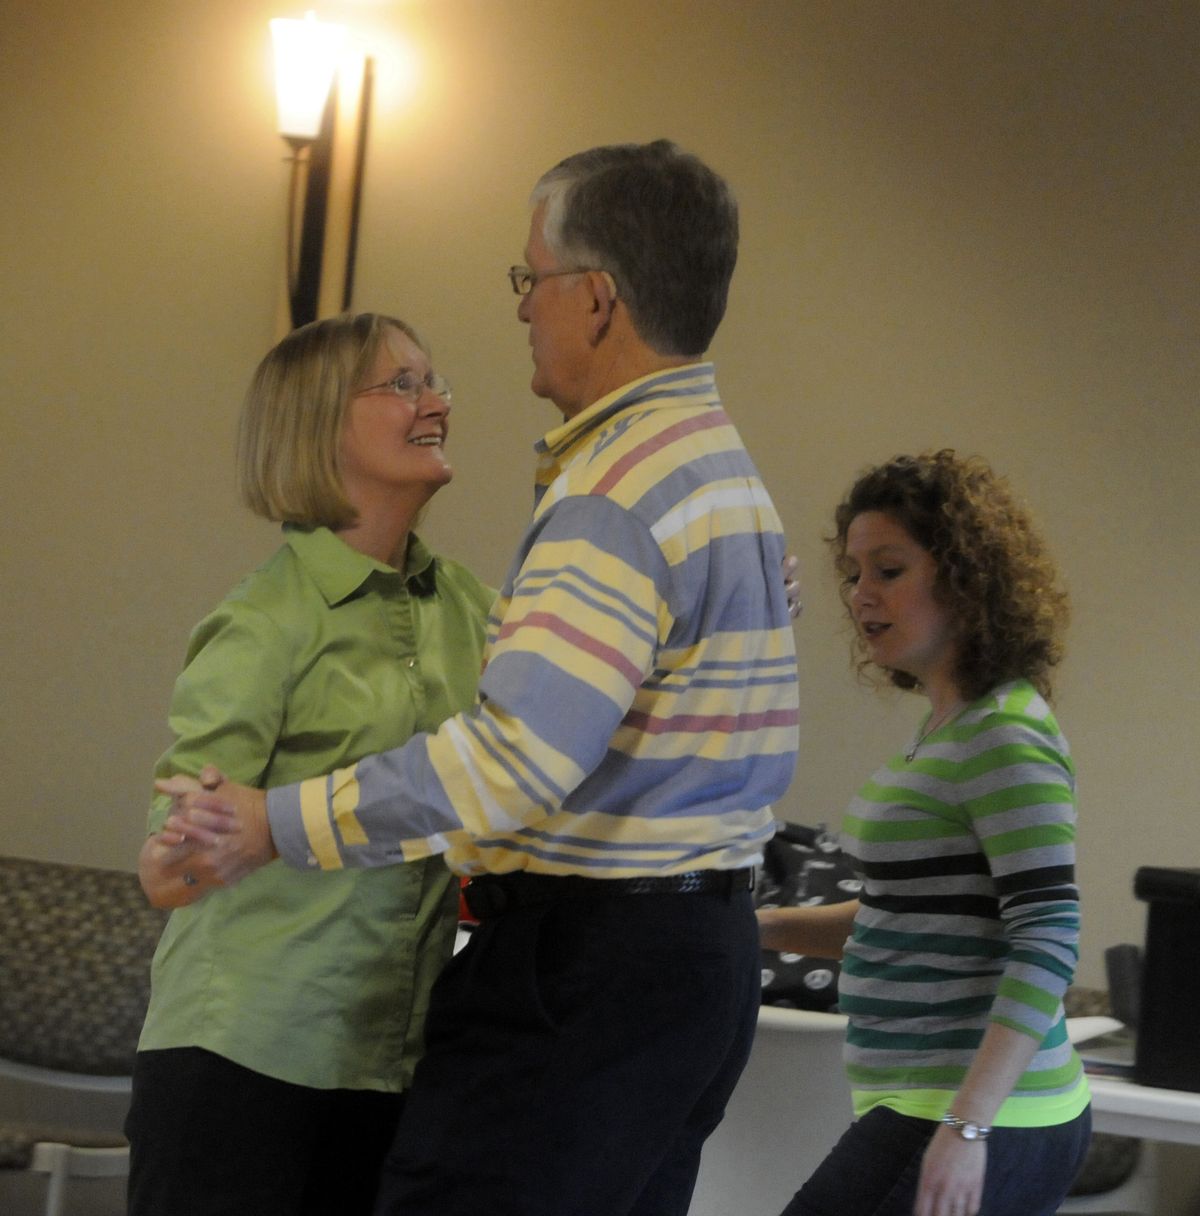 bartr@spokesman.com Dance instructor Melissa Finke watches as Bruce and Sheila Bell of Liberty Lake, learn to ballroom dance during Spokane Parks and Recreation dance lessons at CenterPlace,  April 12. “Come back in six weeks,” Bruce Bell commented, “we’ll be tearing it up.” (J. BART RAYNIAK)